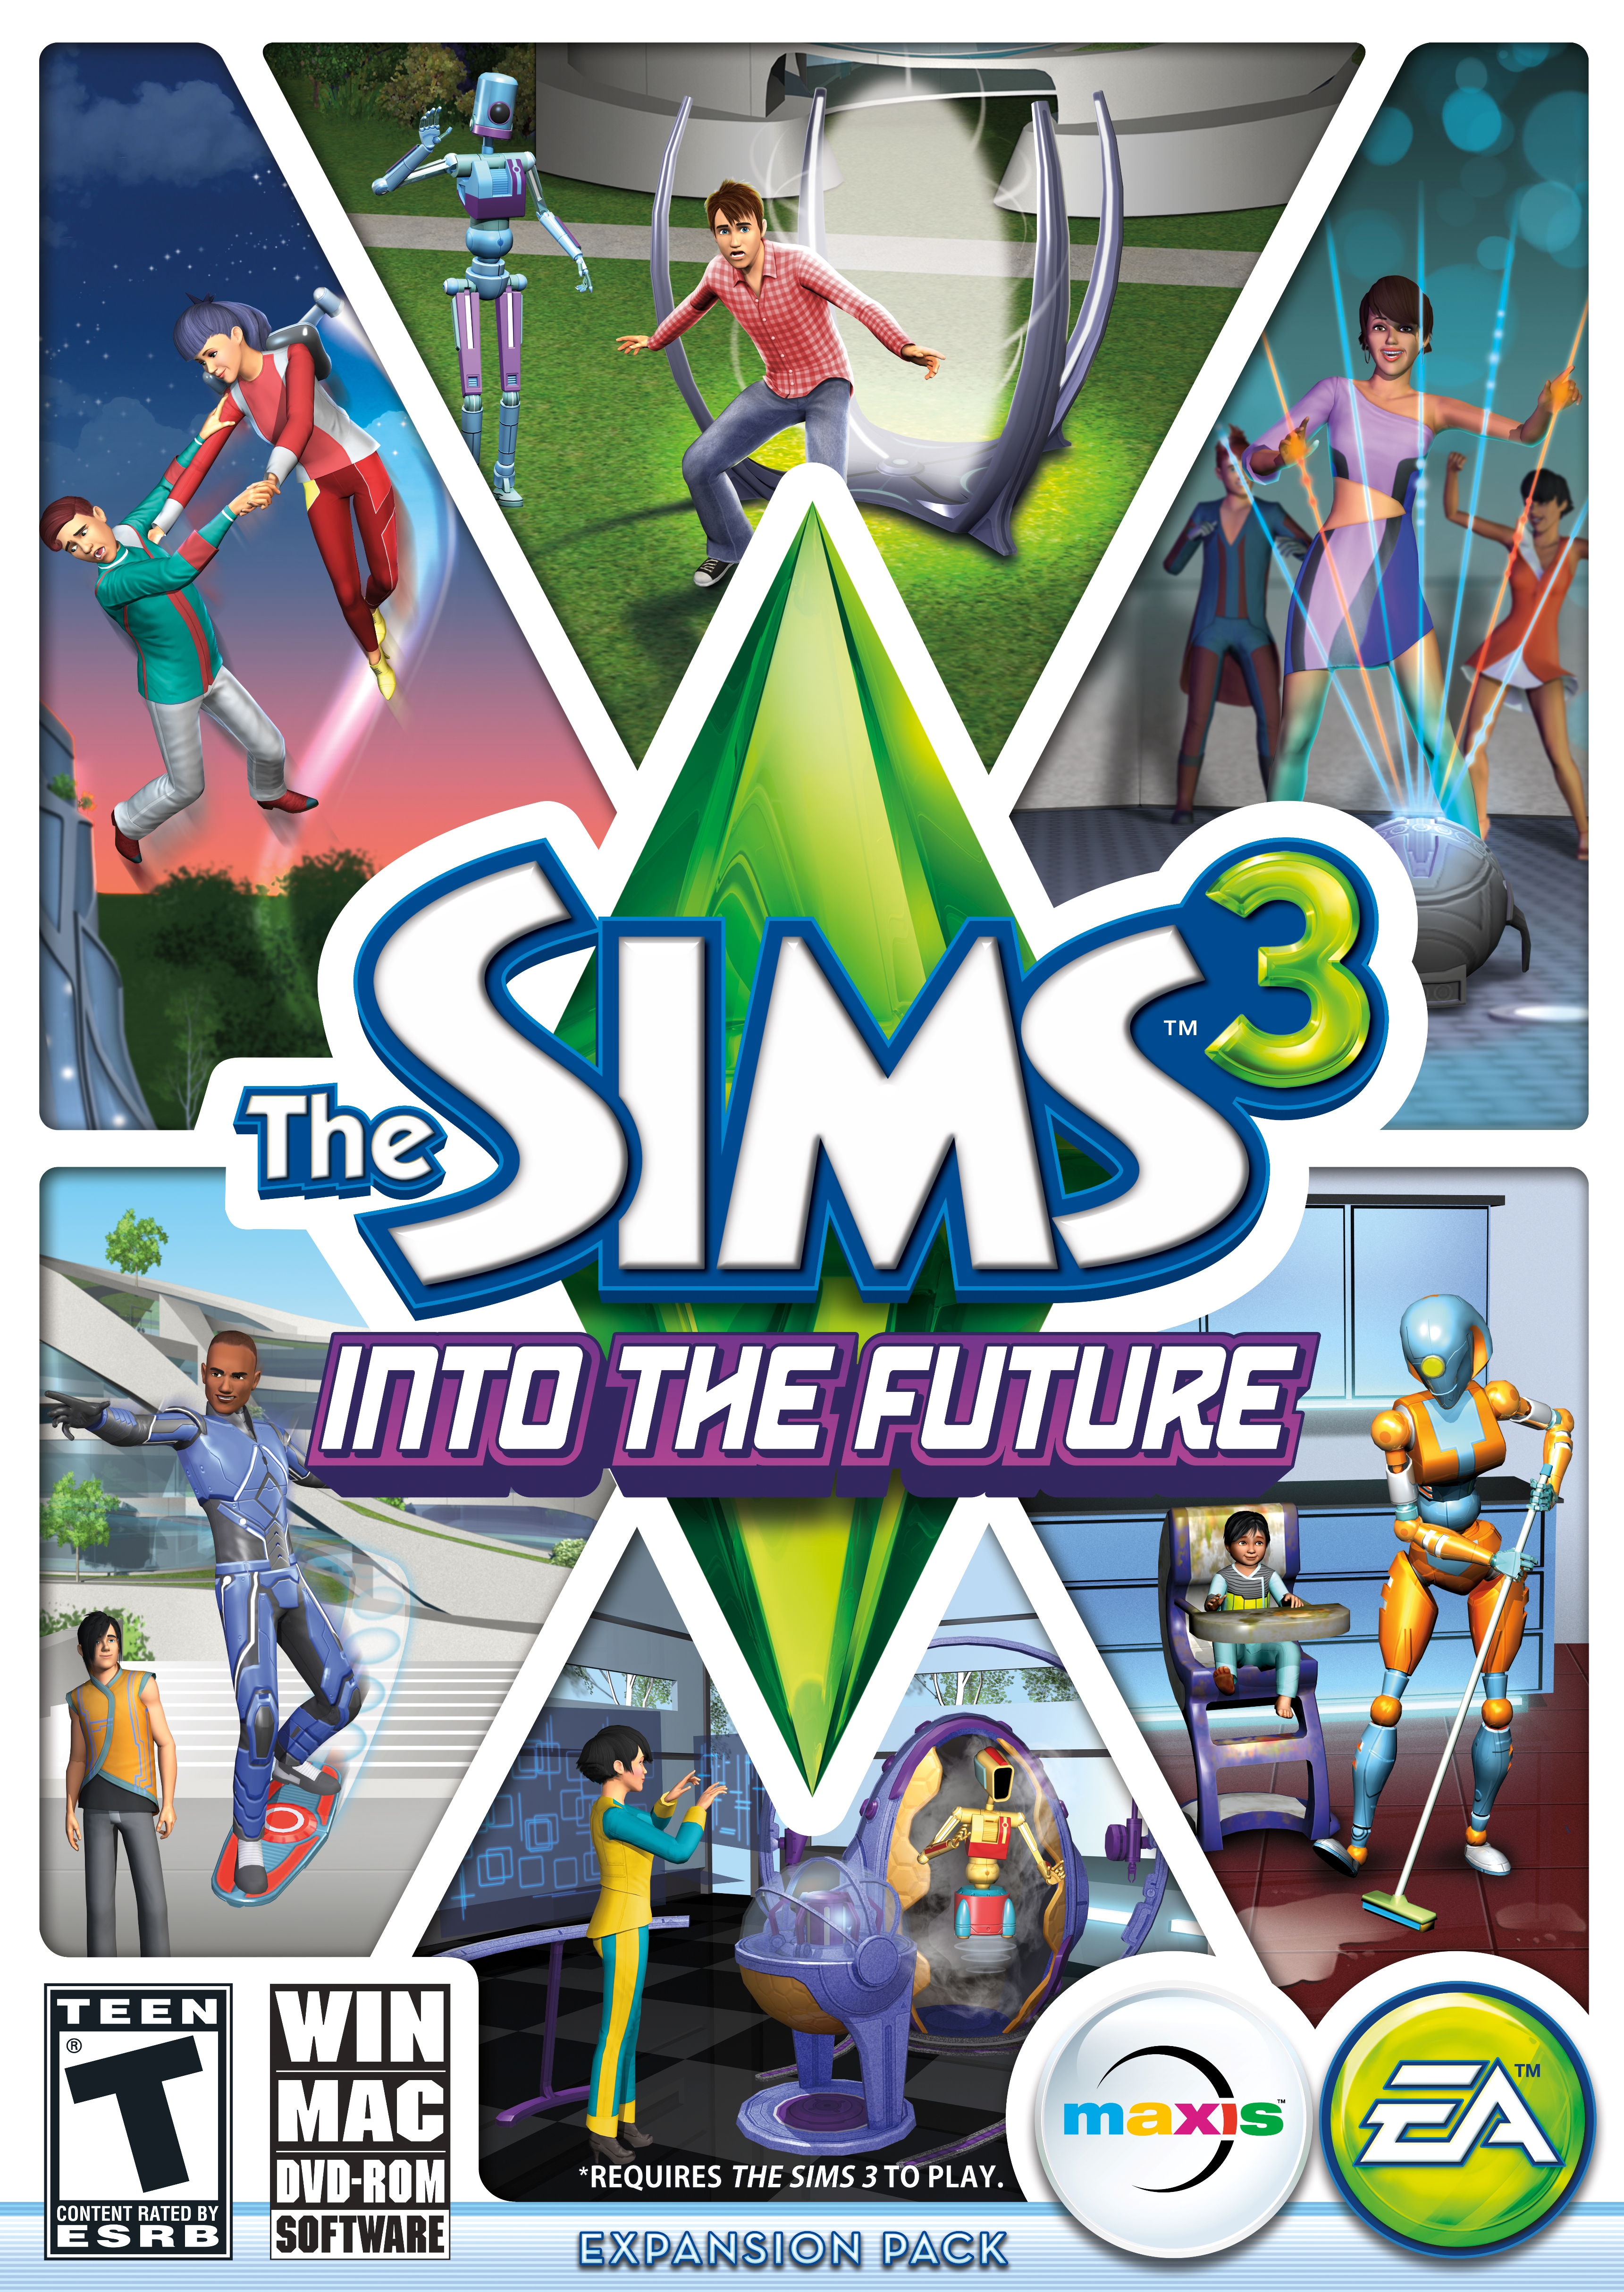 sims 3 into the future objects